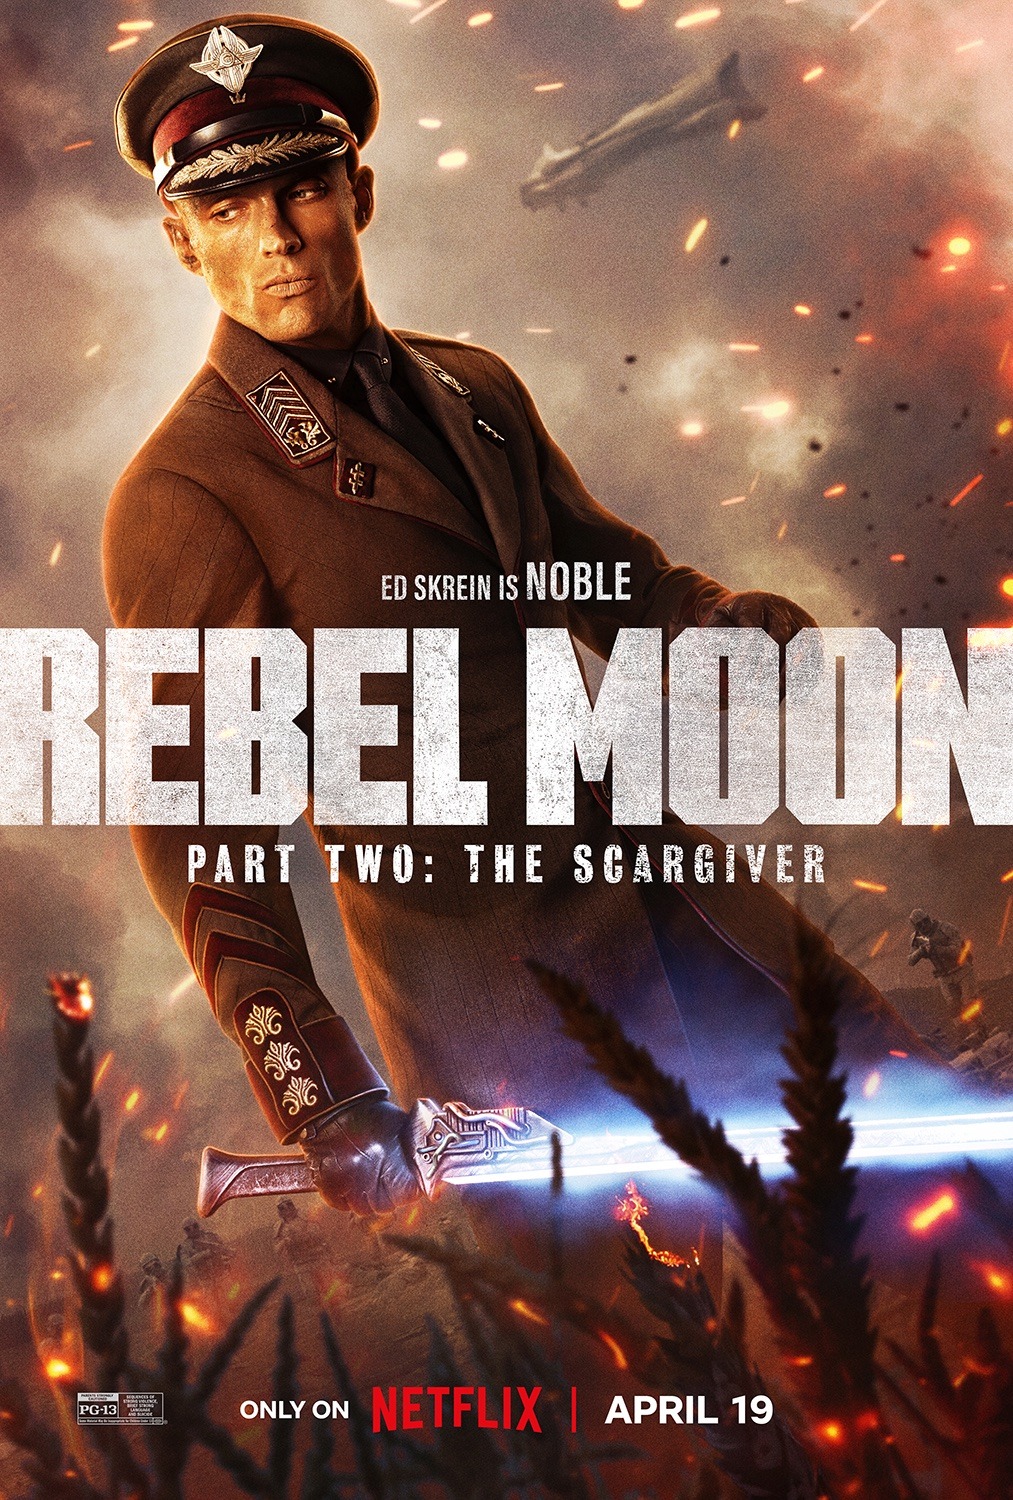 Extra Large Movie Poster Image for Rebel Moon - Part Two: The Scargiver (#10 of 14)